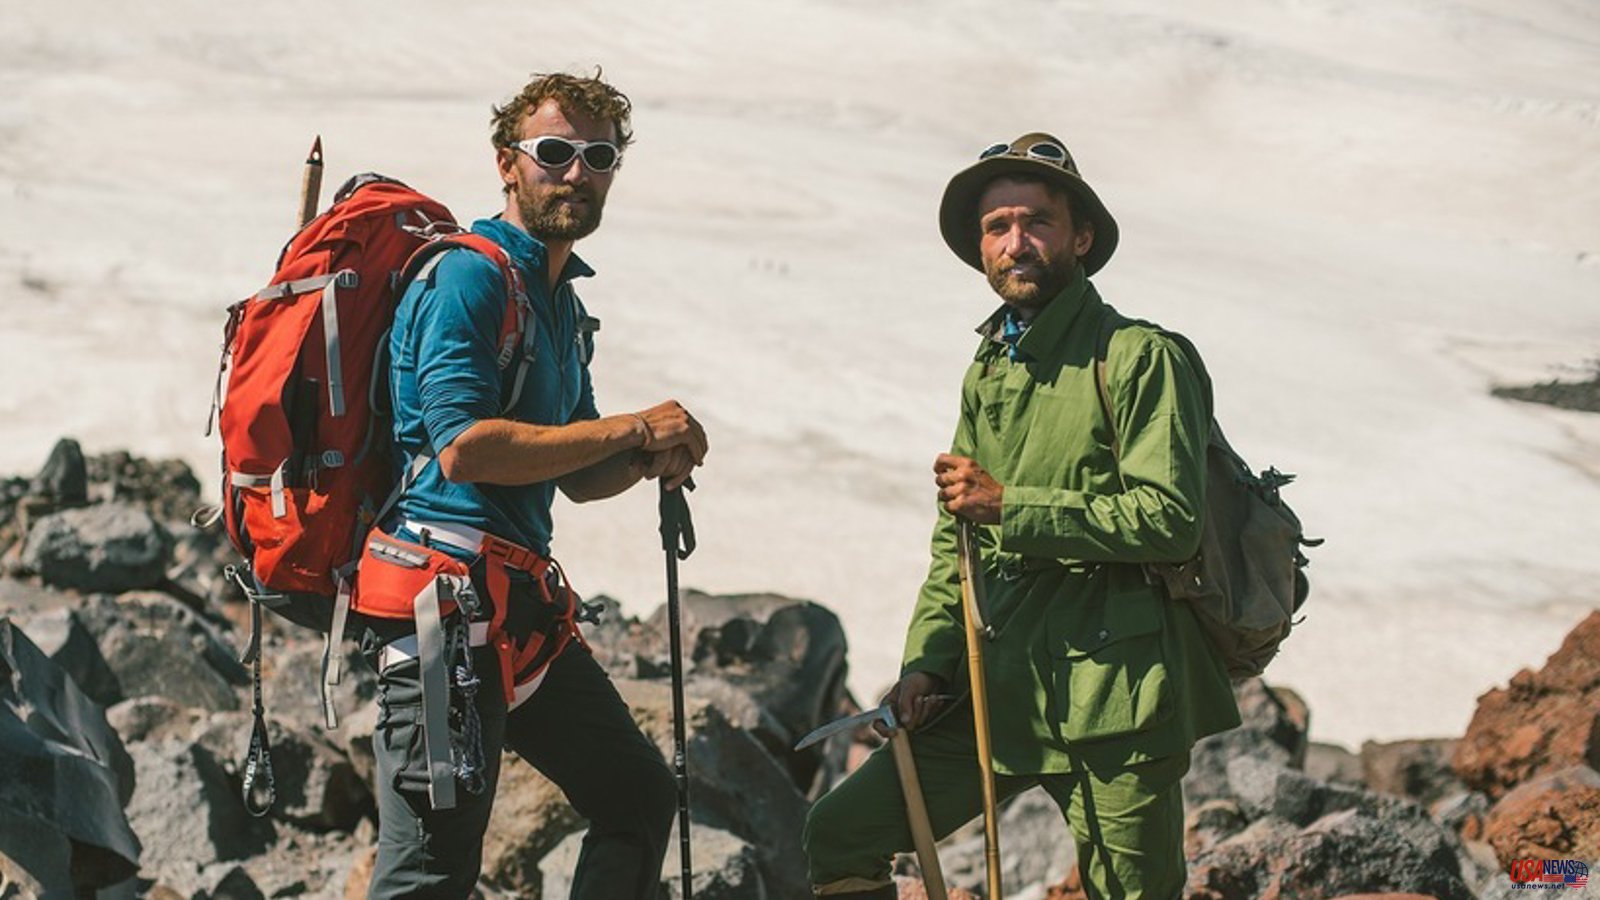 Adventurer twins explore the remotest parts of the globe